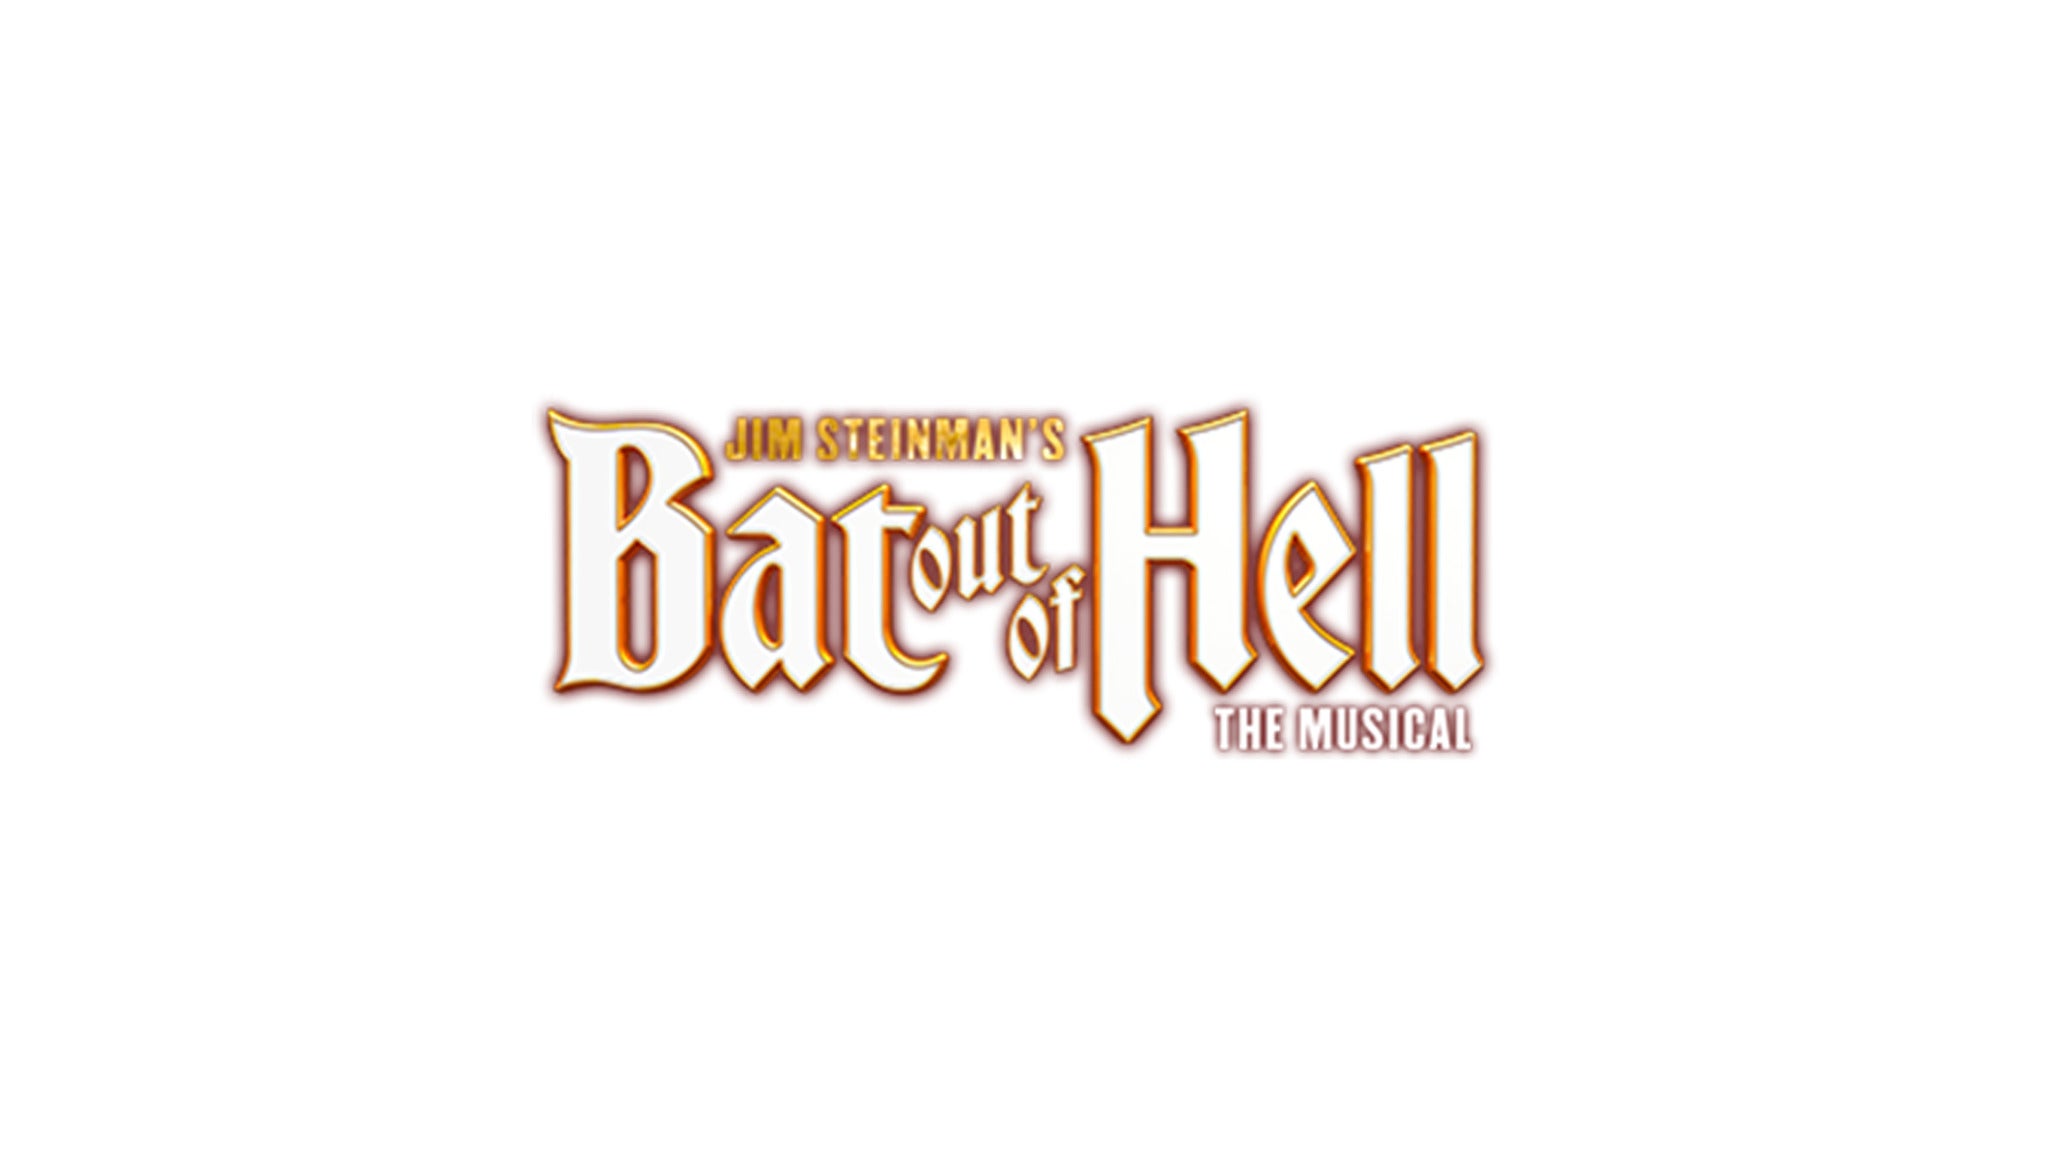 Bat Out Of Hell The Musical (Touring) in Hollywood promo photo for Ticketmaster presale offer code